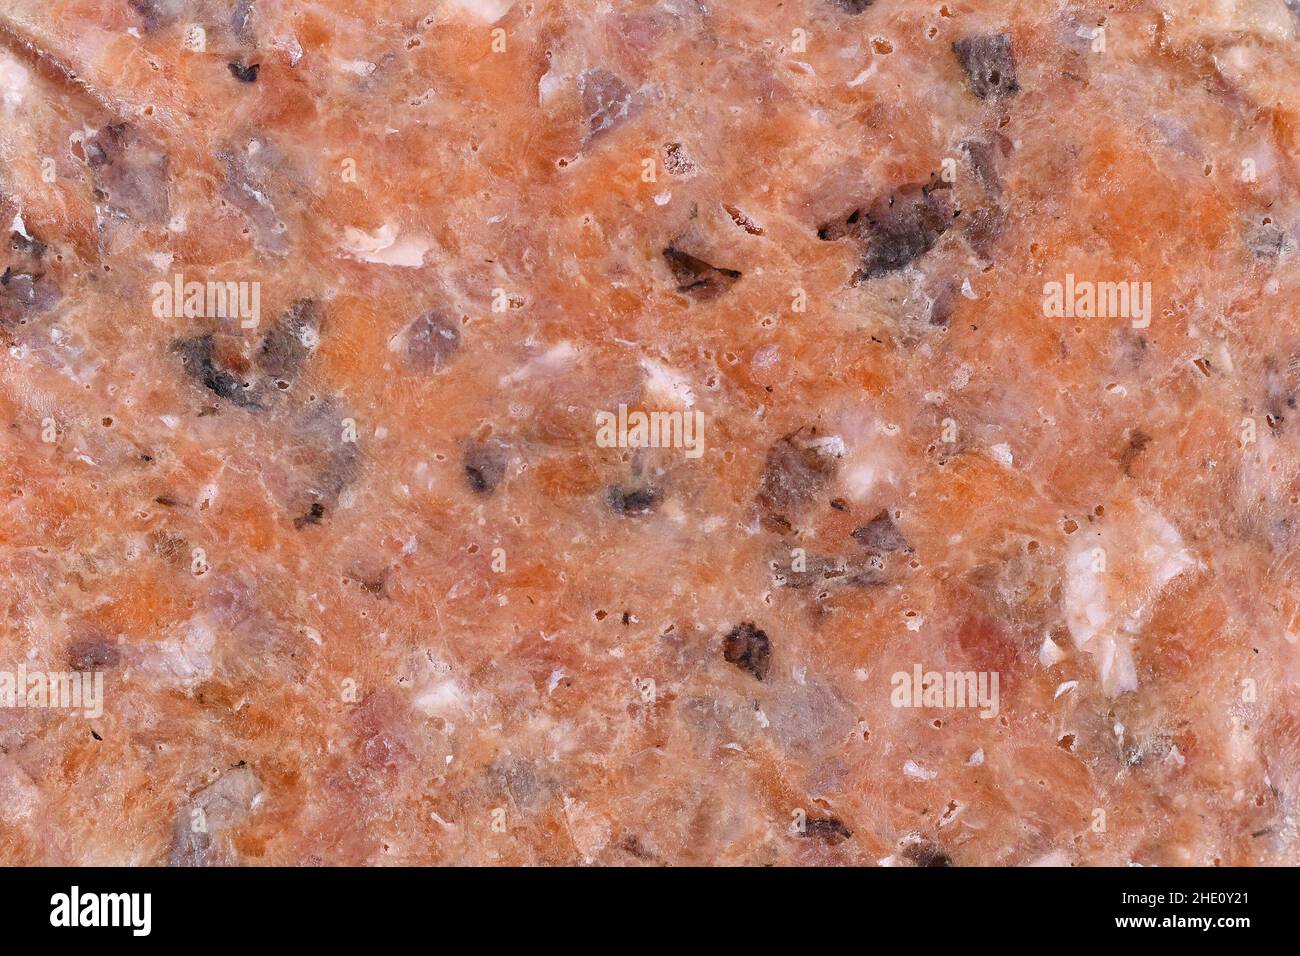 Frozen raw minced salmon fish used for dog food Stock Photo